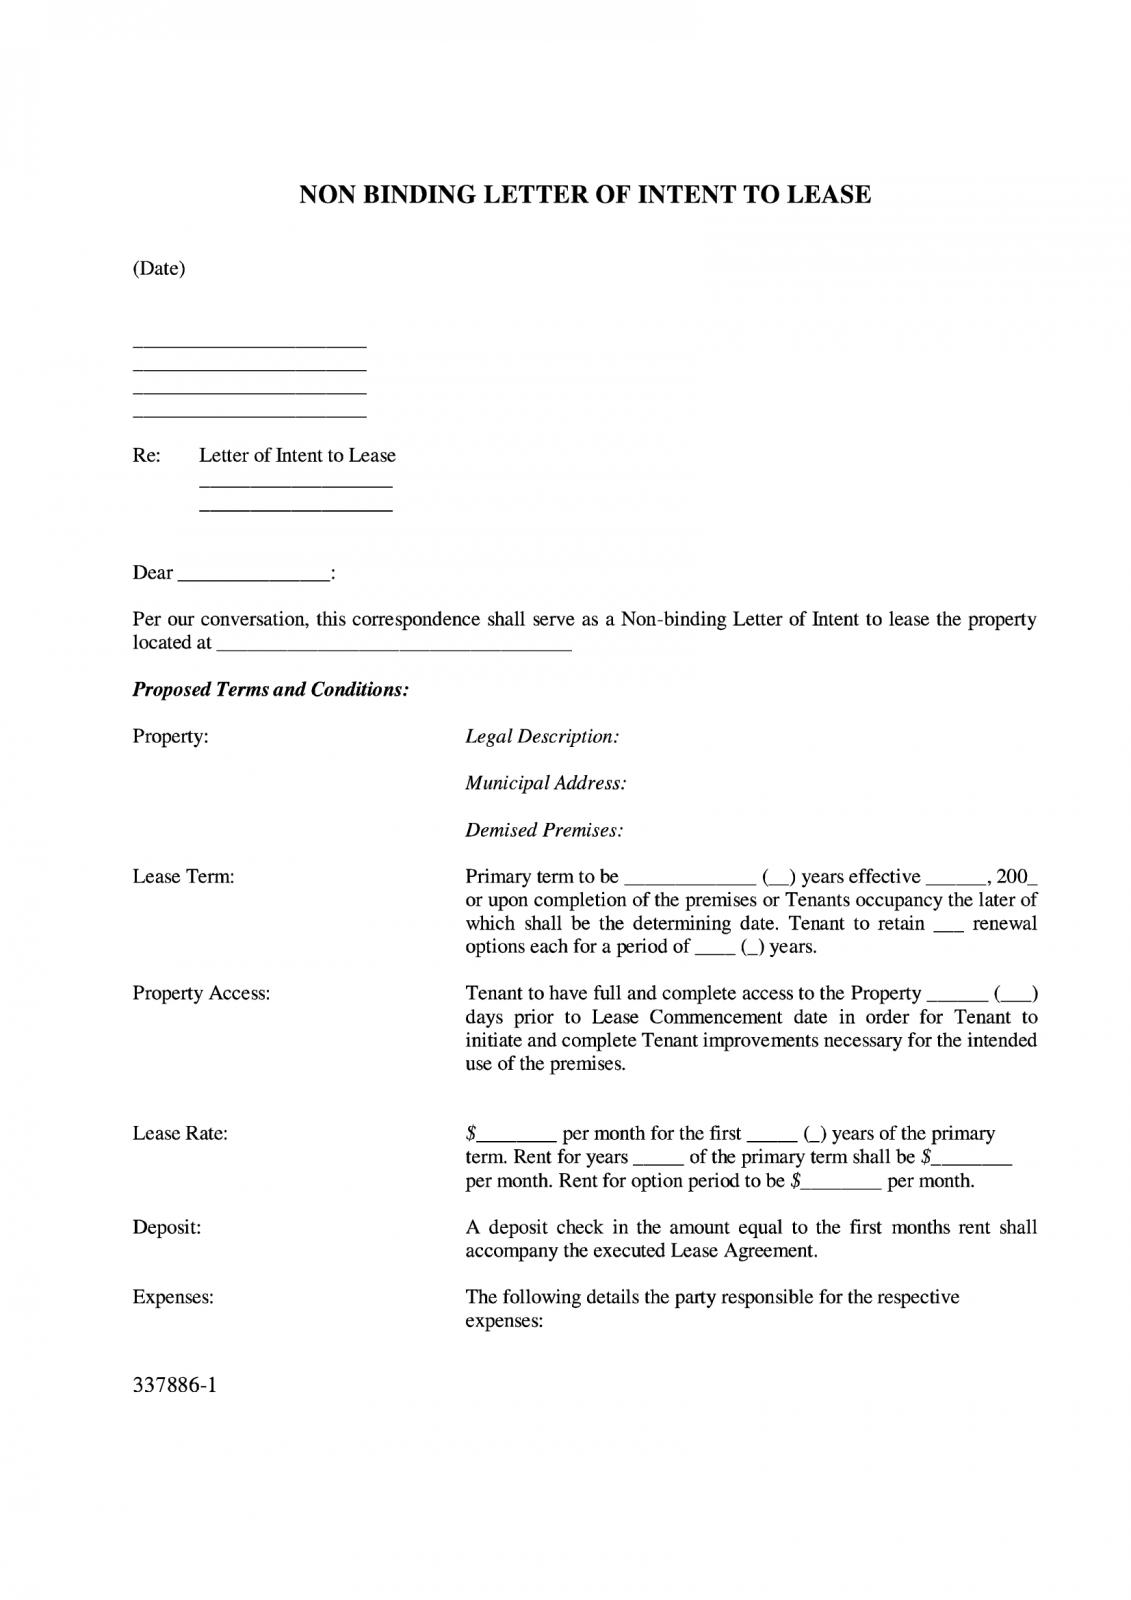 Lease Letter Of Intent  Blanker.org In Business Lease Proposal Template